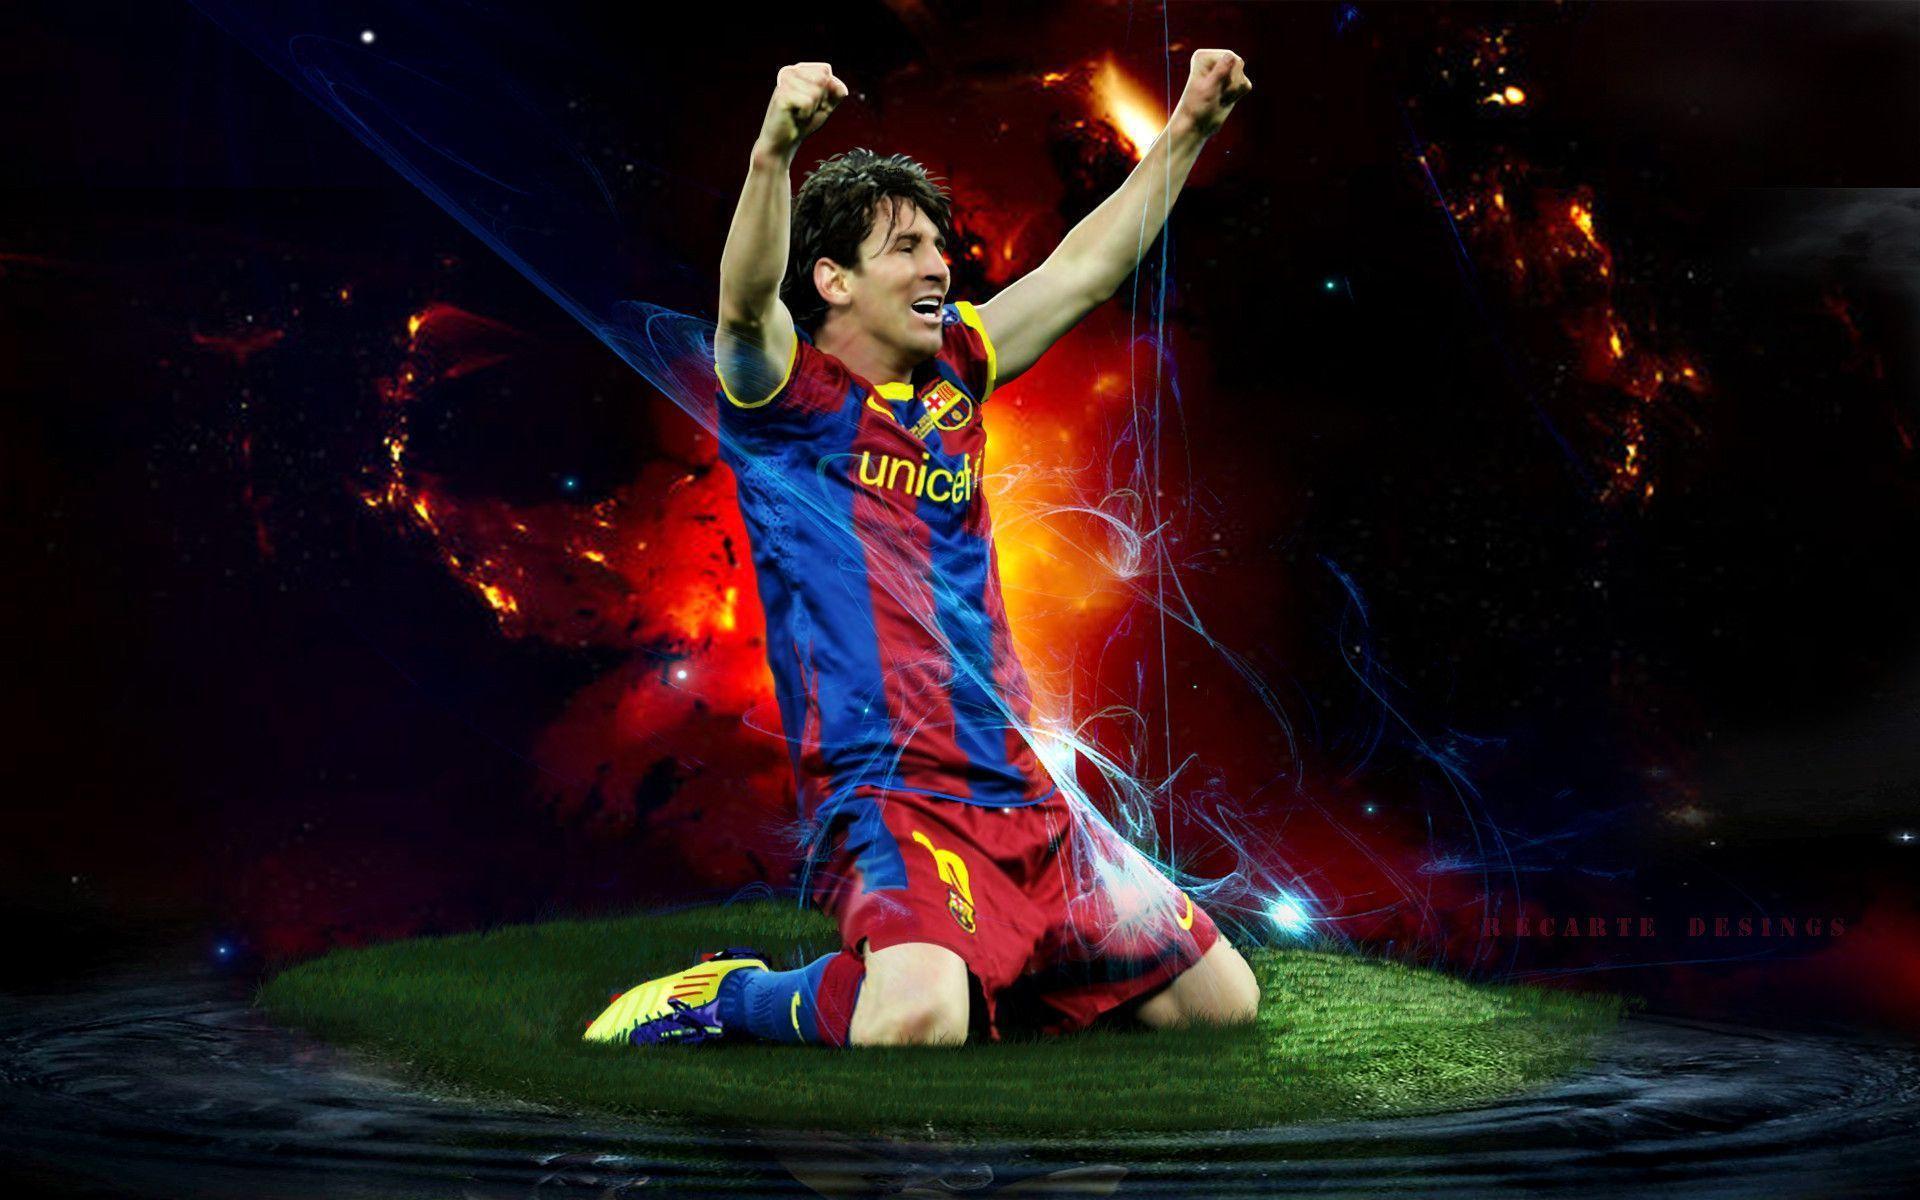 Lionel Messi 2015 Wallpapers HD 1080p